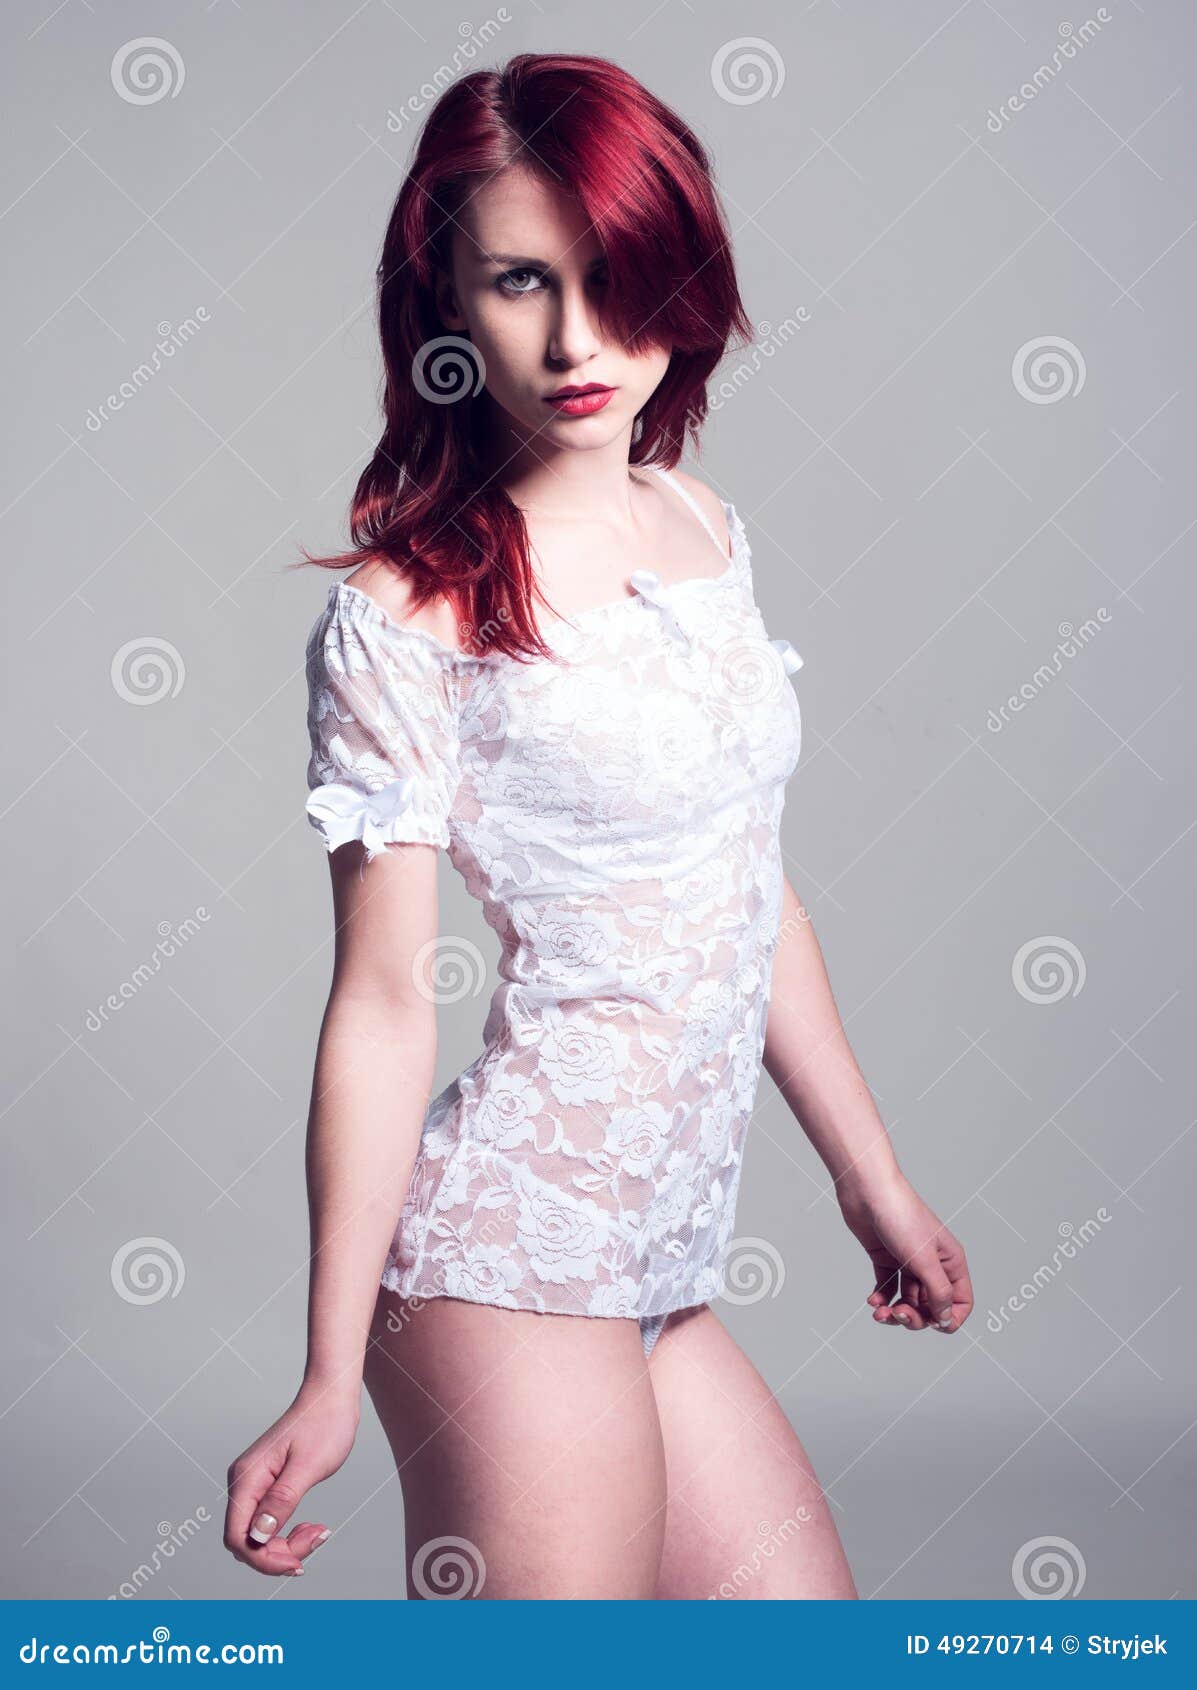 Woman in See through White Shirt Looking at Camera Stock Photo